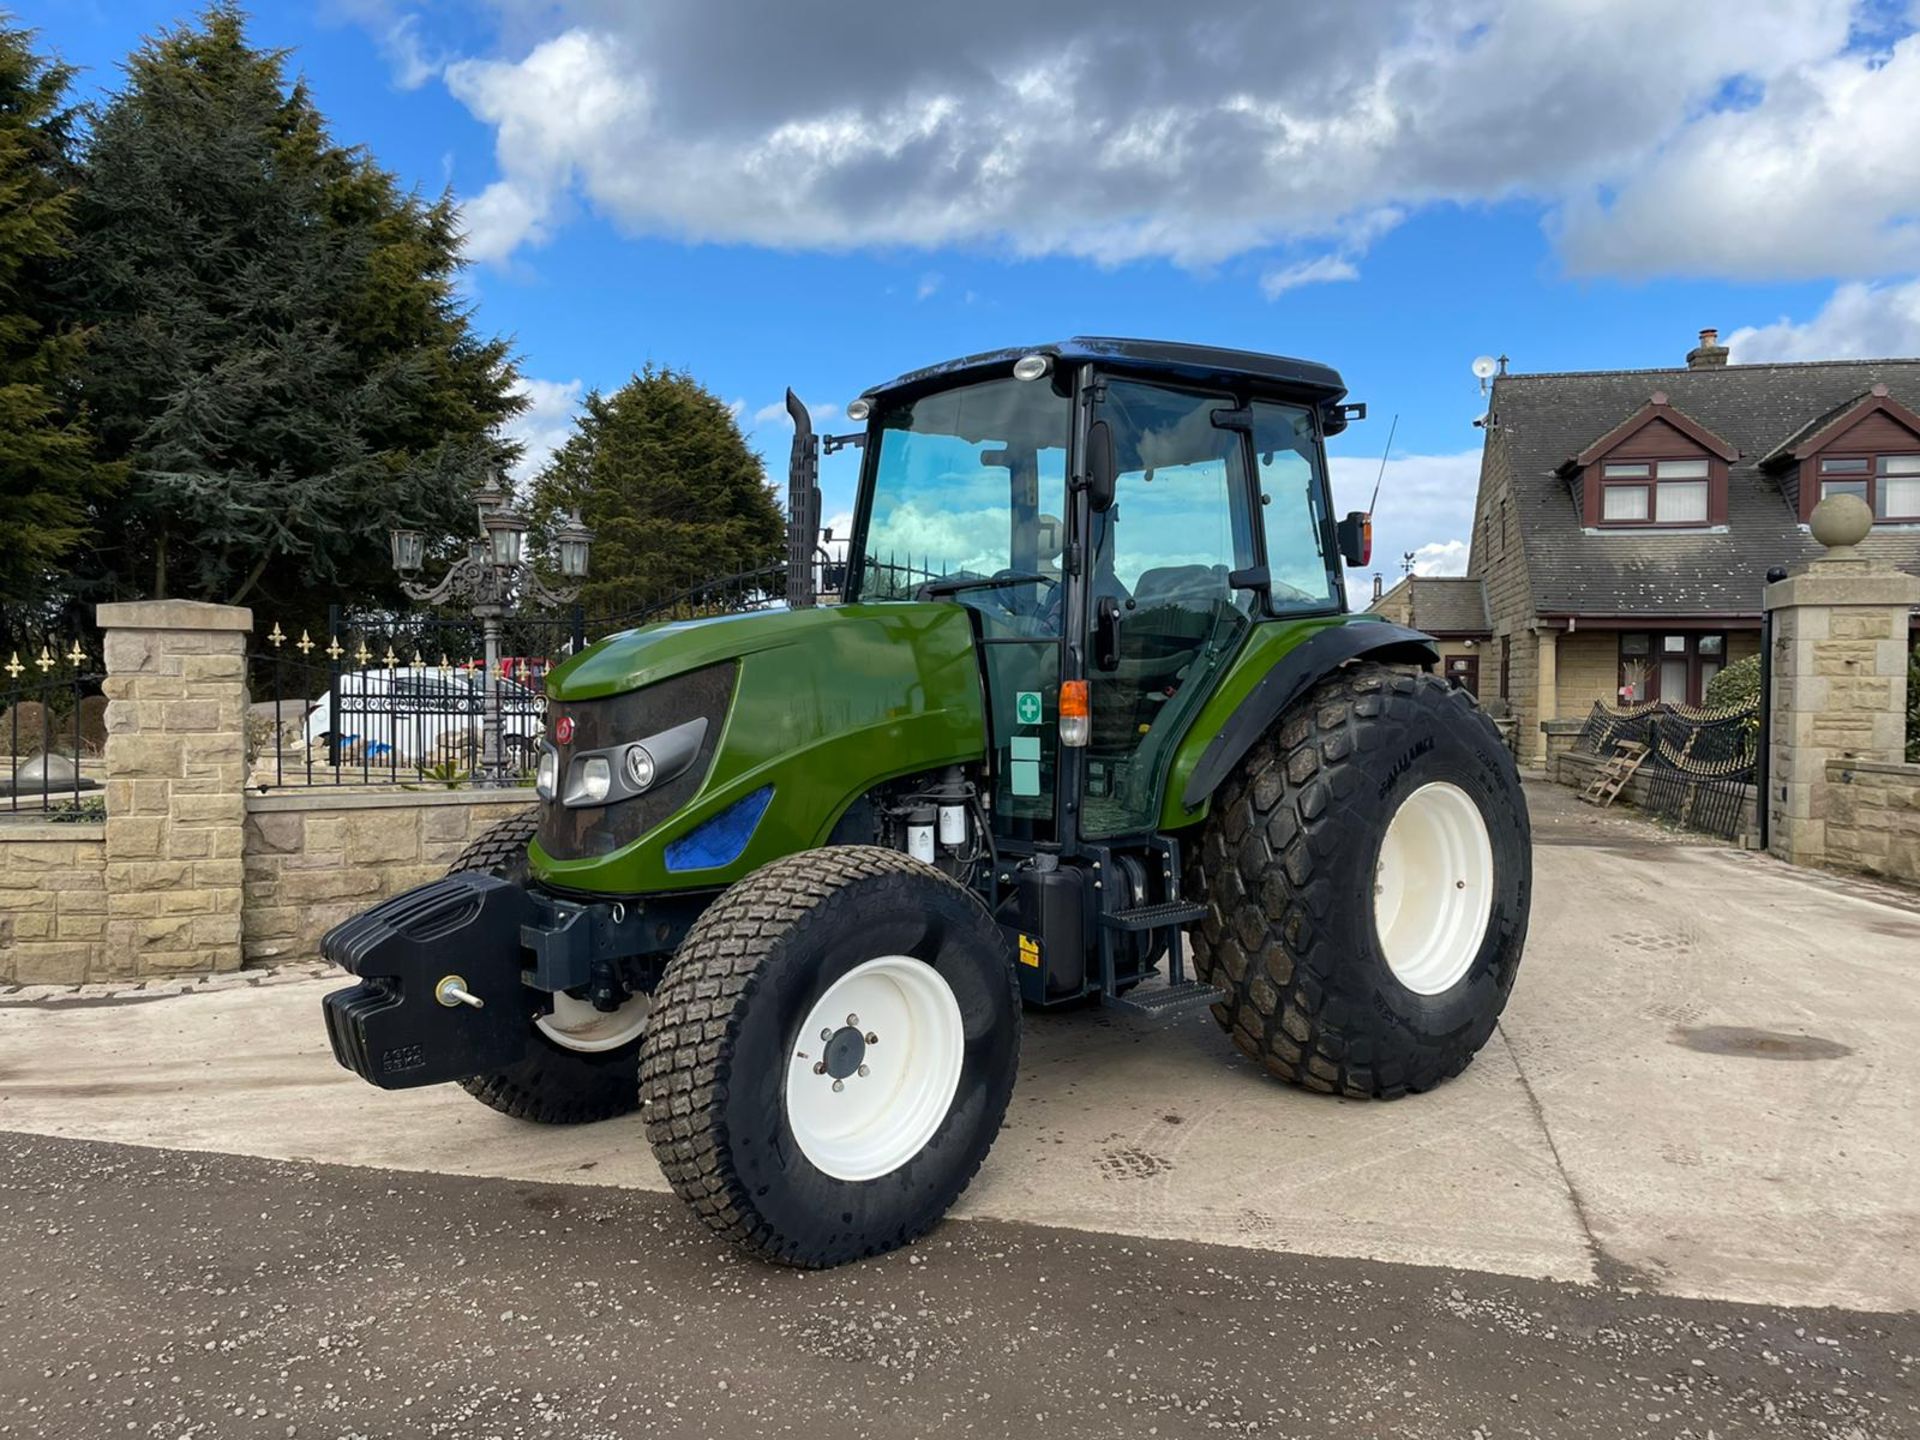 2014 ISEKI TJA8080 TRACTOR, FULLY GLASS CAB, GRASS TYRES,86HP, FRONT WEIGHTS *PLUS VAT - Image 2 of 11